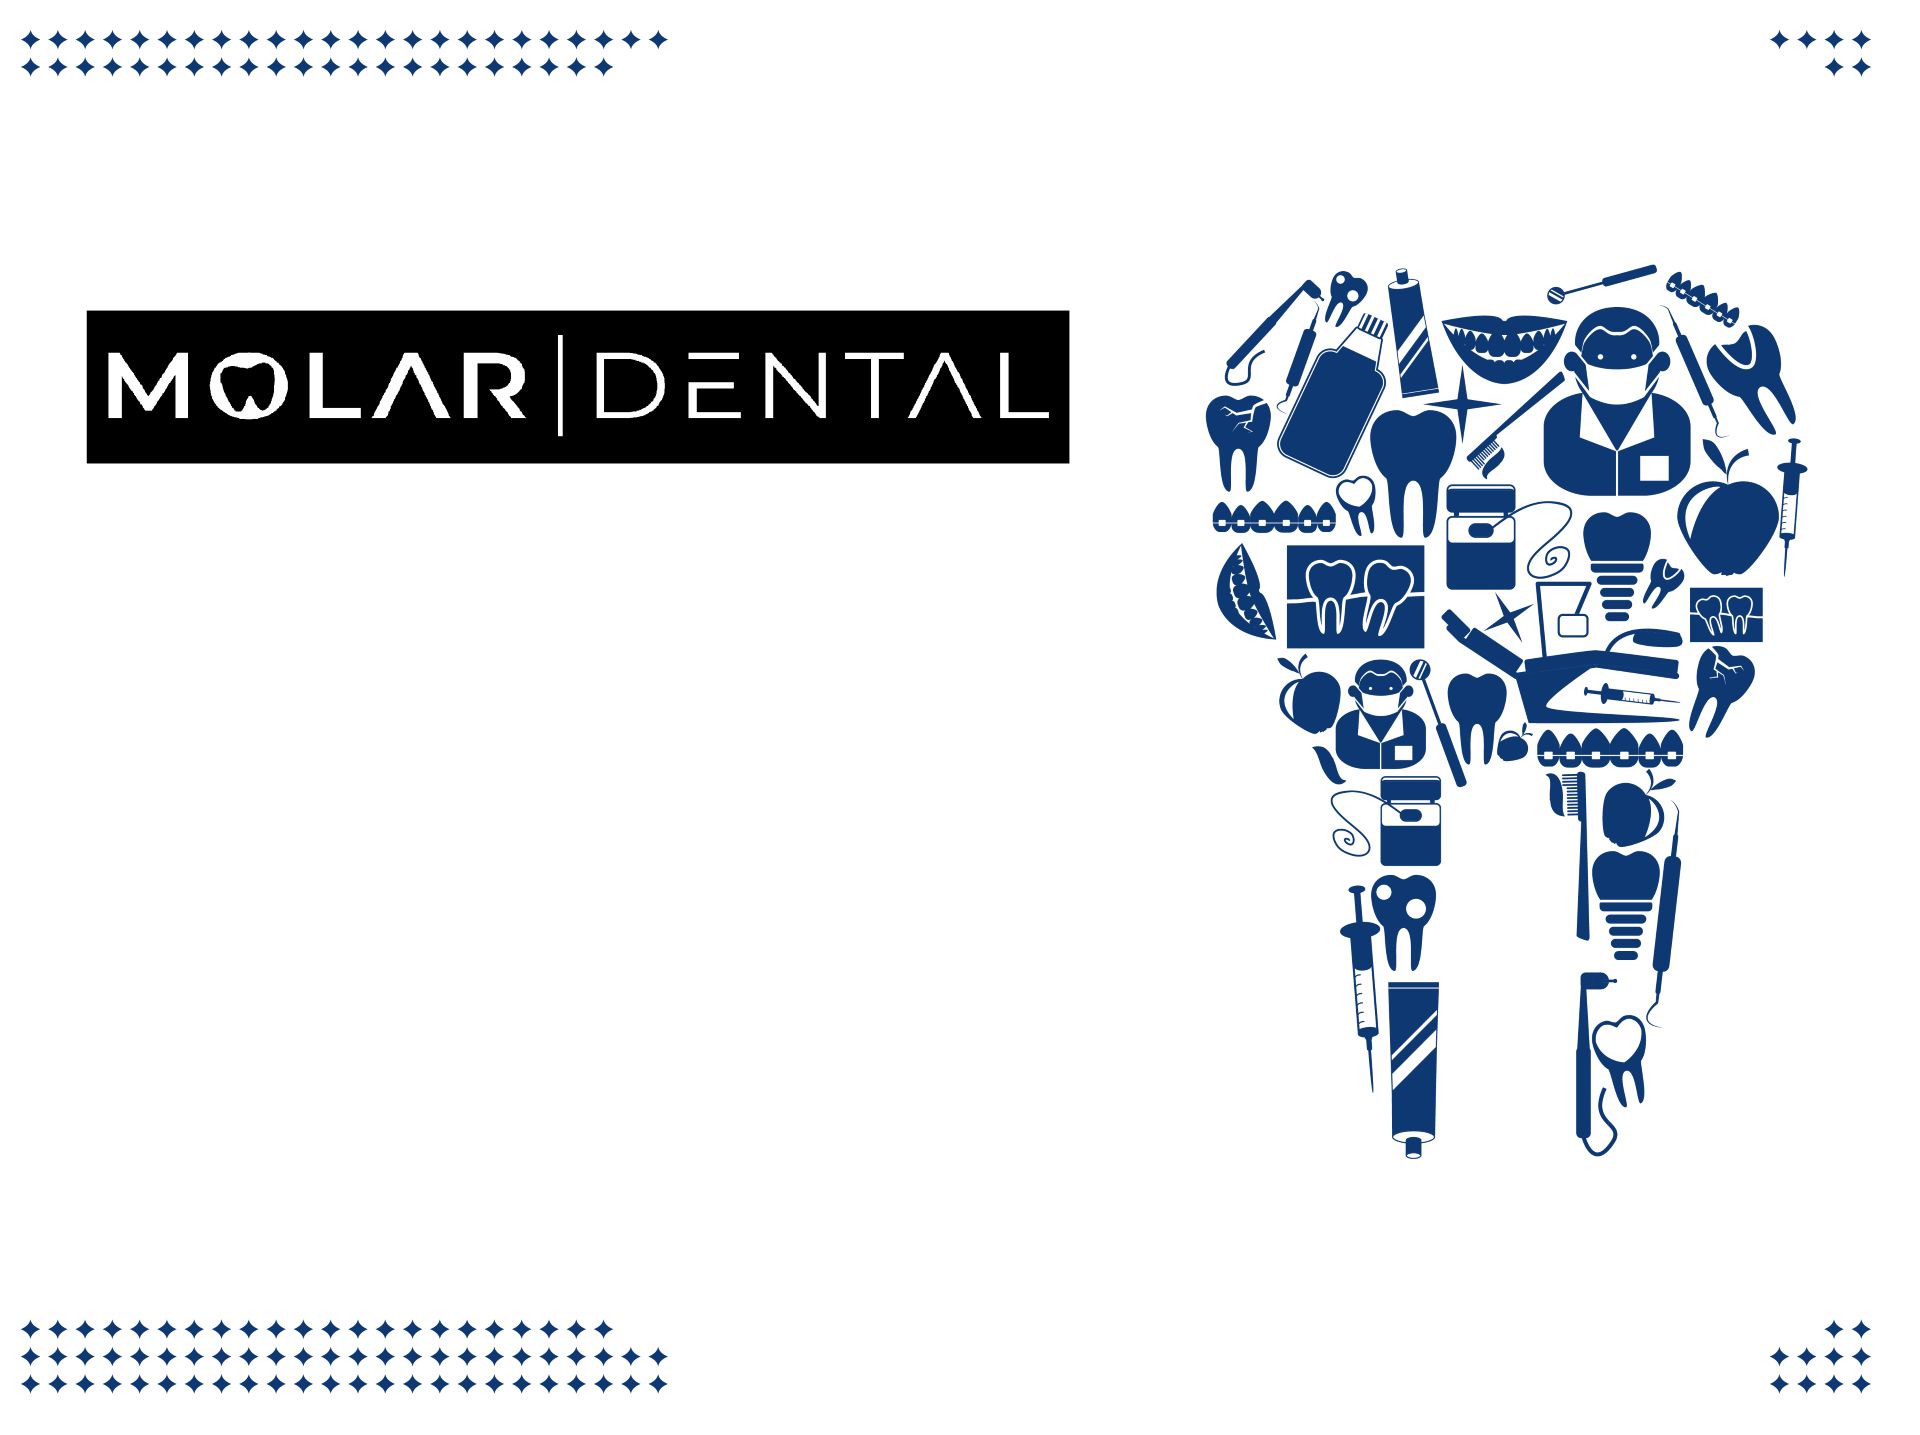 a poster for molar dental showing a tooth made up of dental icons .